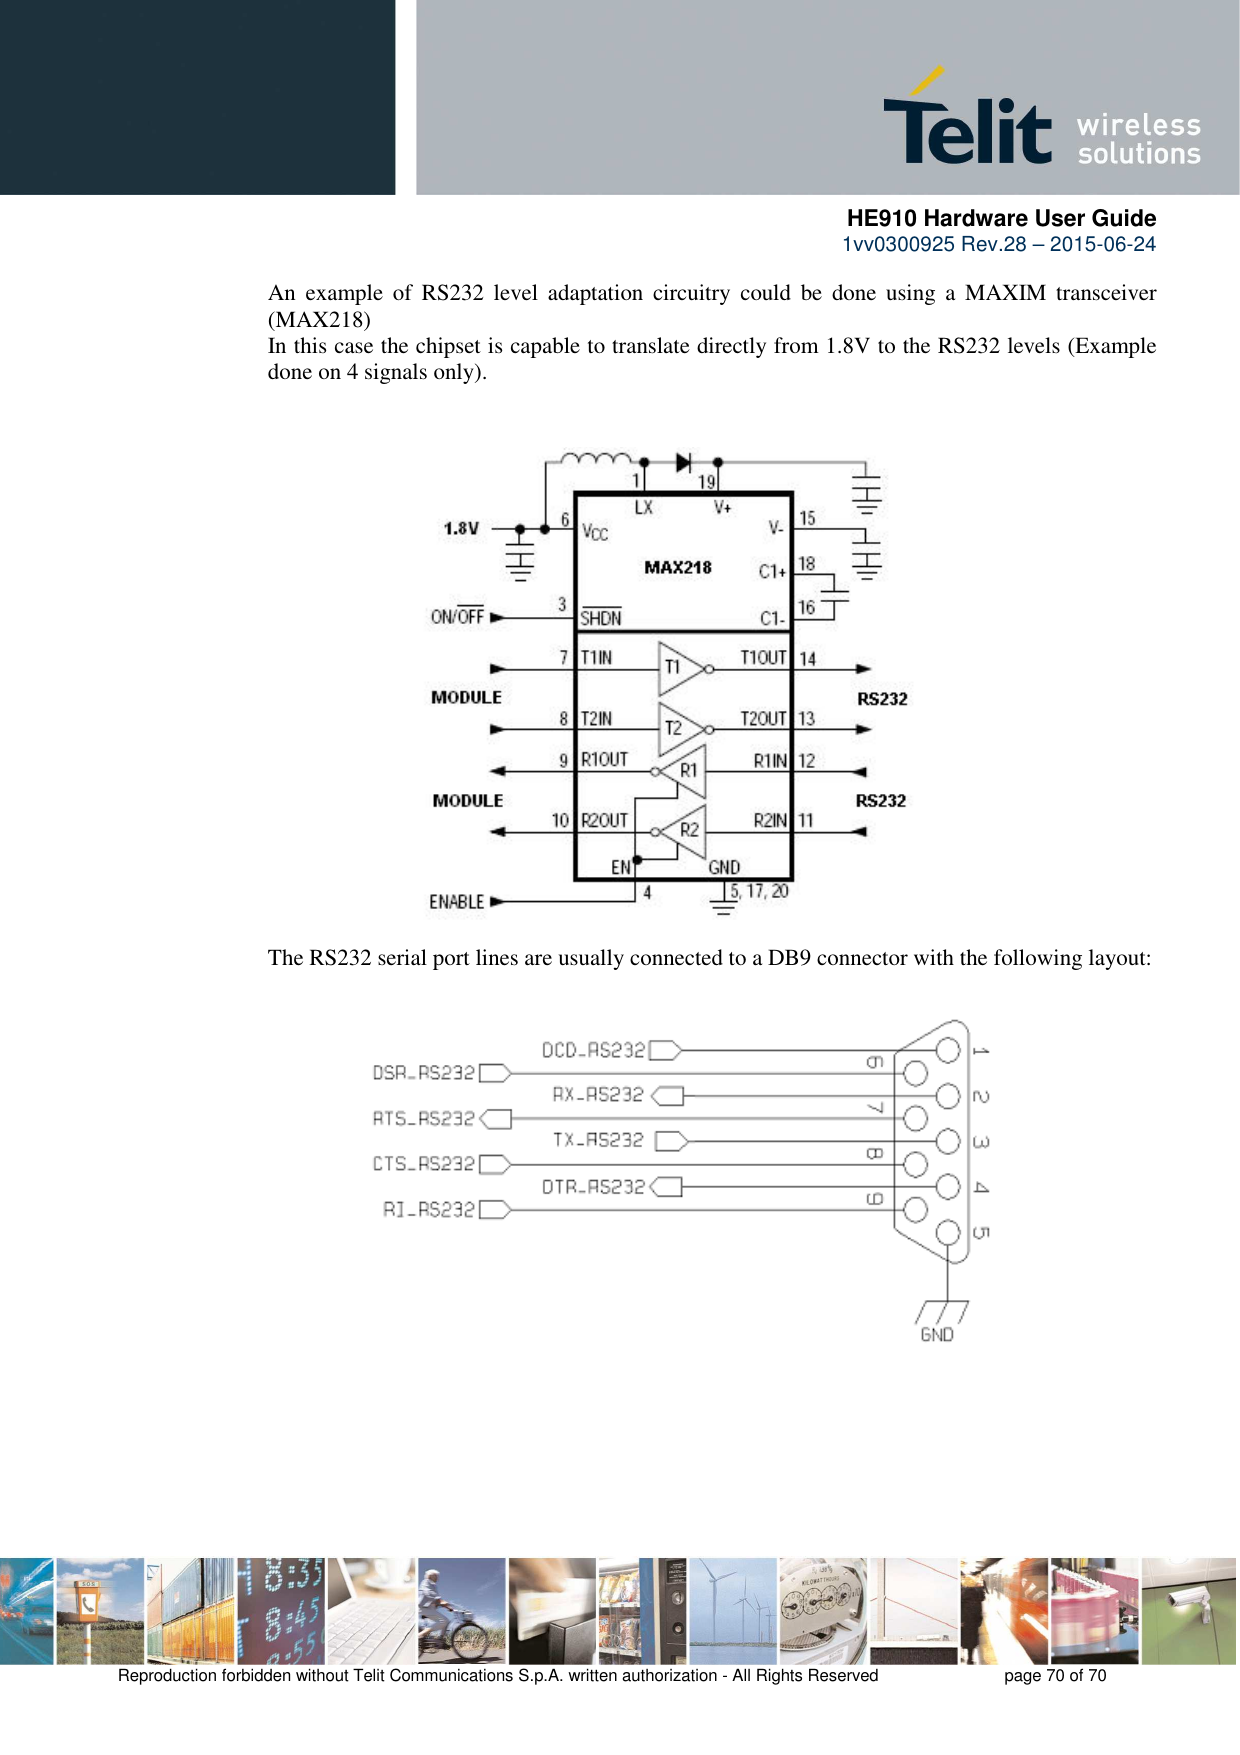      HE910 Hardware User Guide 1vv0300925 Rev.28 – 2015-06-24    Reproduction forbidden without Telit Communications S.p.A. written authorization - All Rights Reserved    page 70 of 70  An  example  of  RS232  level  adaptation  circuitry  could  be  done  using  a  MAXIM  transceiver (MAX218)  In this case the chipset is capable to translate directly from 1.8V to the RS232 levels (Example done on 4 signals only).                       The RS232 serial port lines are usually connected to a DB9 connector with the following layout:              